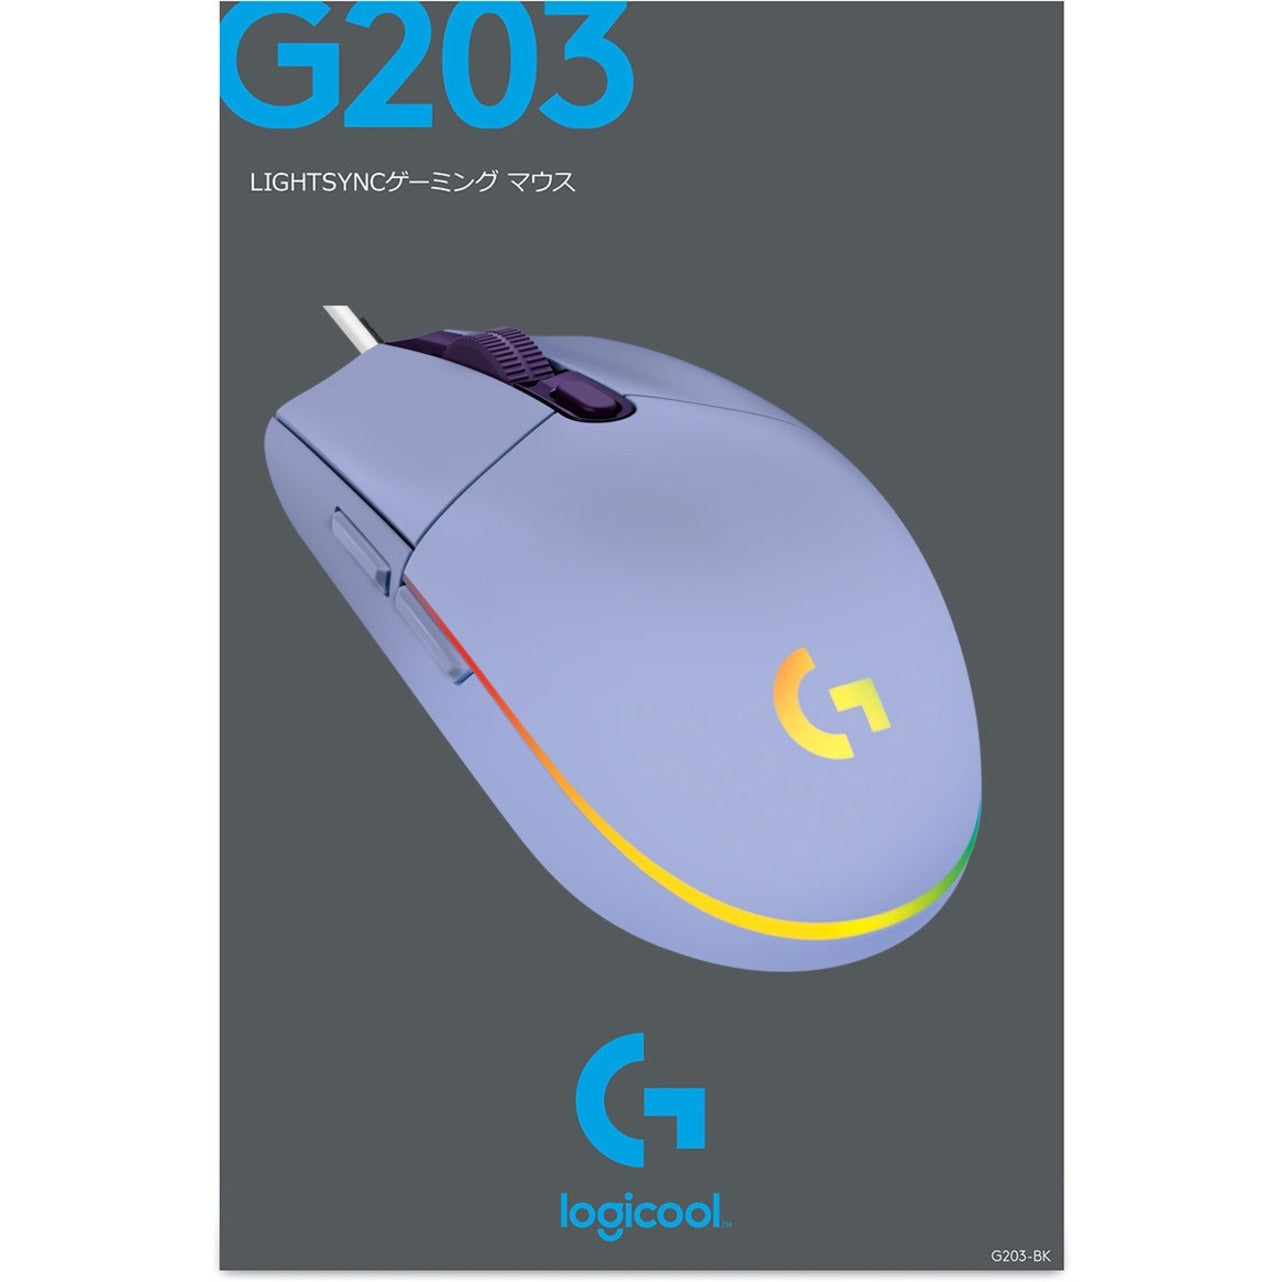 Logitech 910-005851 G203 Gaming Mouse, 6 Buttons, 8000 dpi, Lilac Color